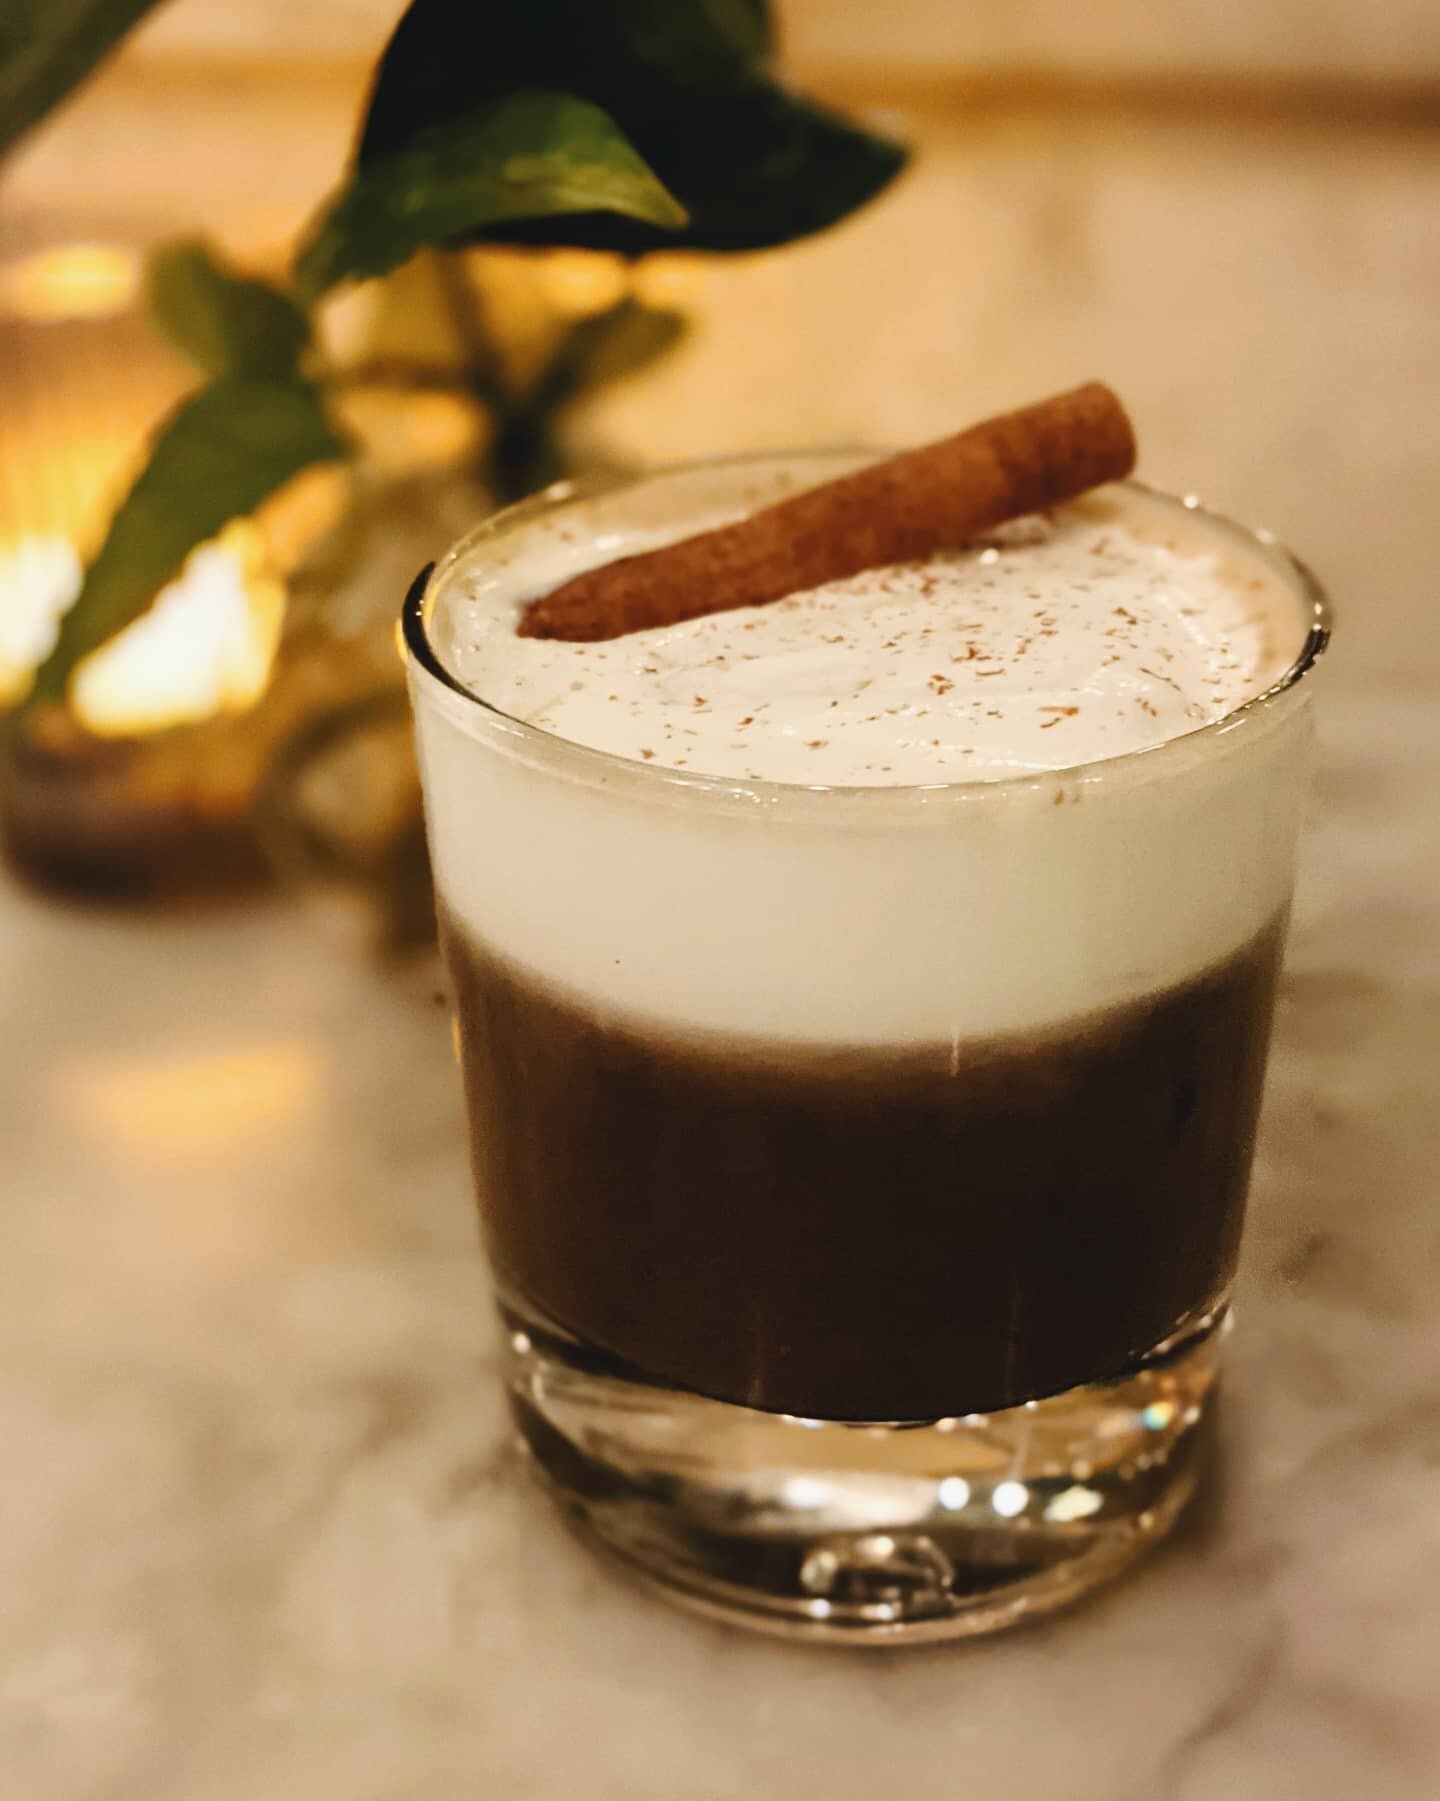 La R&ecirc;ve de Rub&eacute; is the new golden child cocktail of Endswell. Dreamed up by our very own @ruben.delahuerta, this rum based twist on an espresso martini is equal parts smooth and bold with a touch of velvety decadence. (ingredients: White